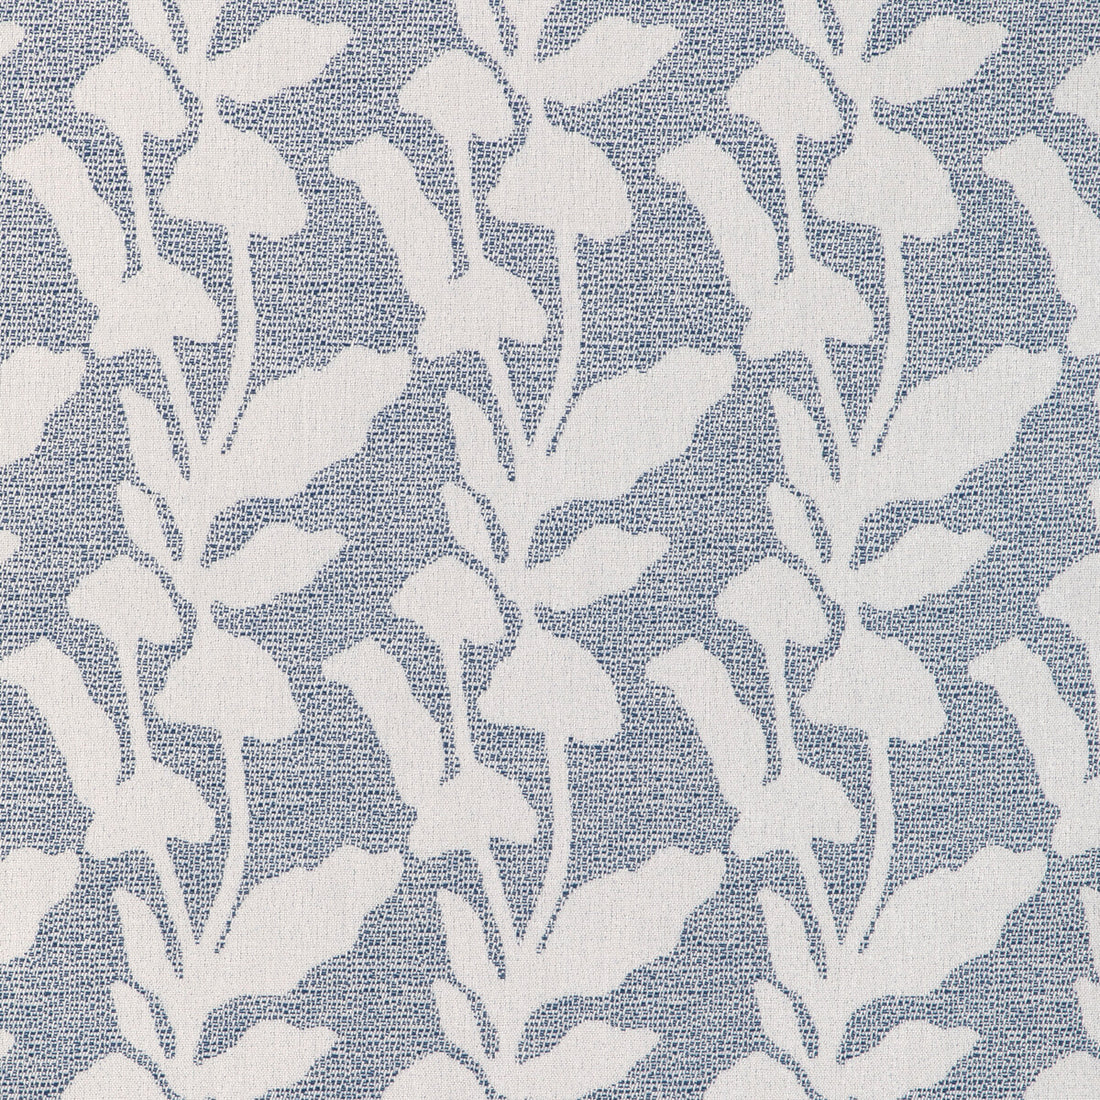 Rose Cliff fabric in marine color - pattern 36937.5.0 - by Kravet Couture in the Riviera collection